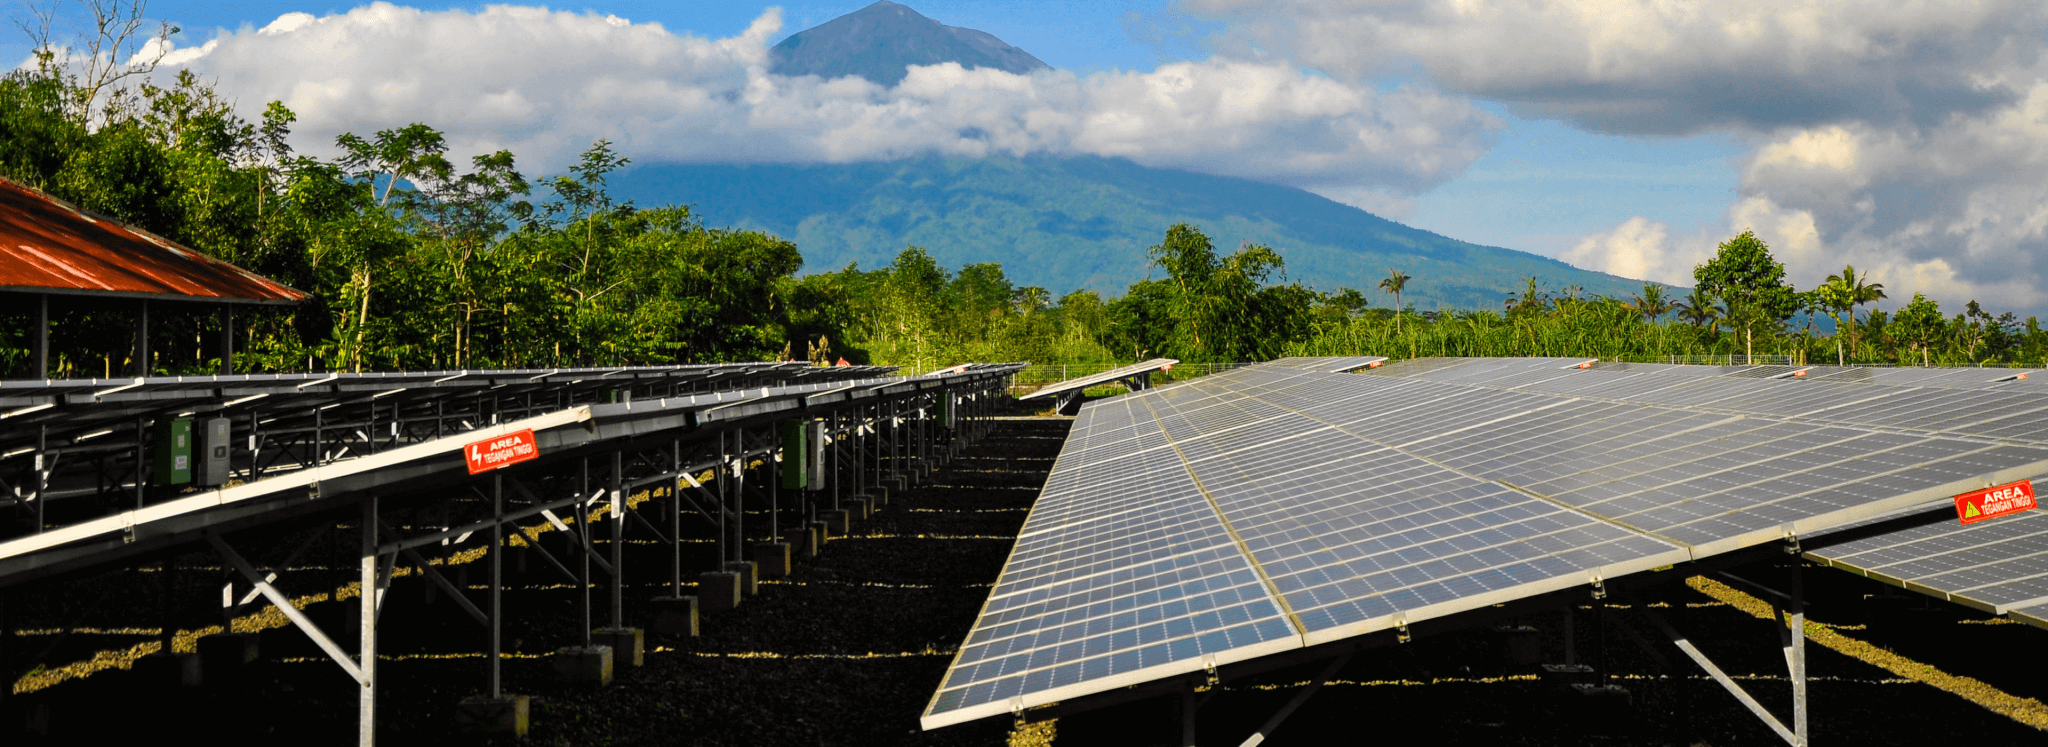 Indonesia’s transition from coal to renewable energy